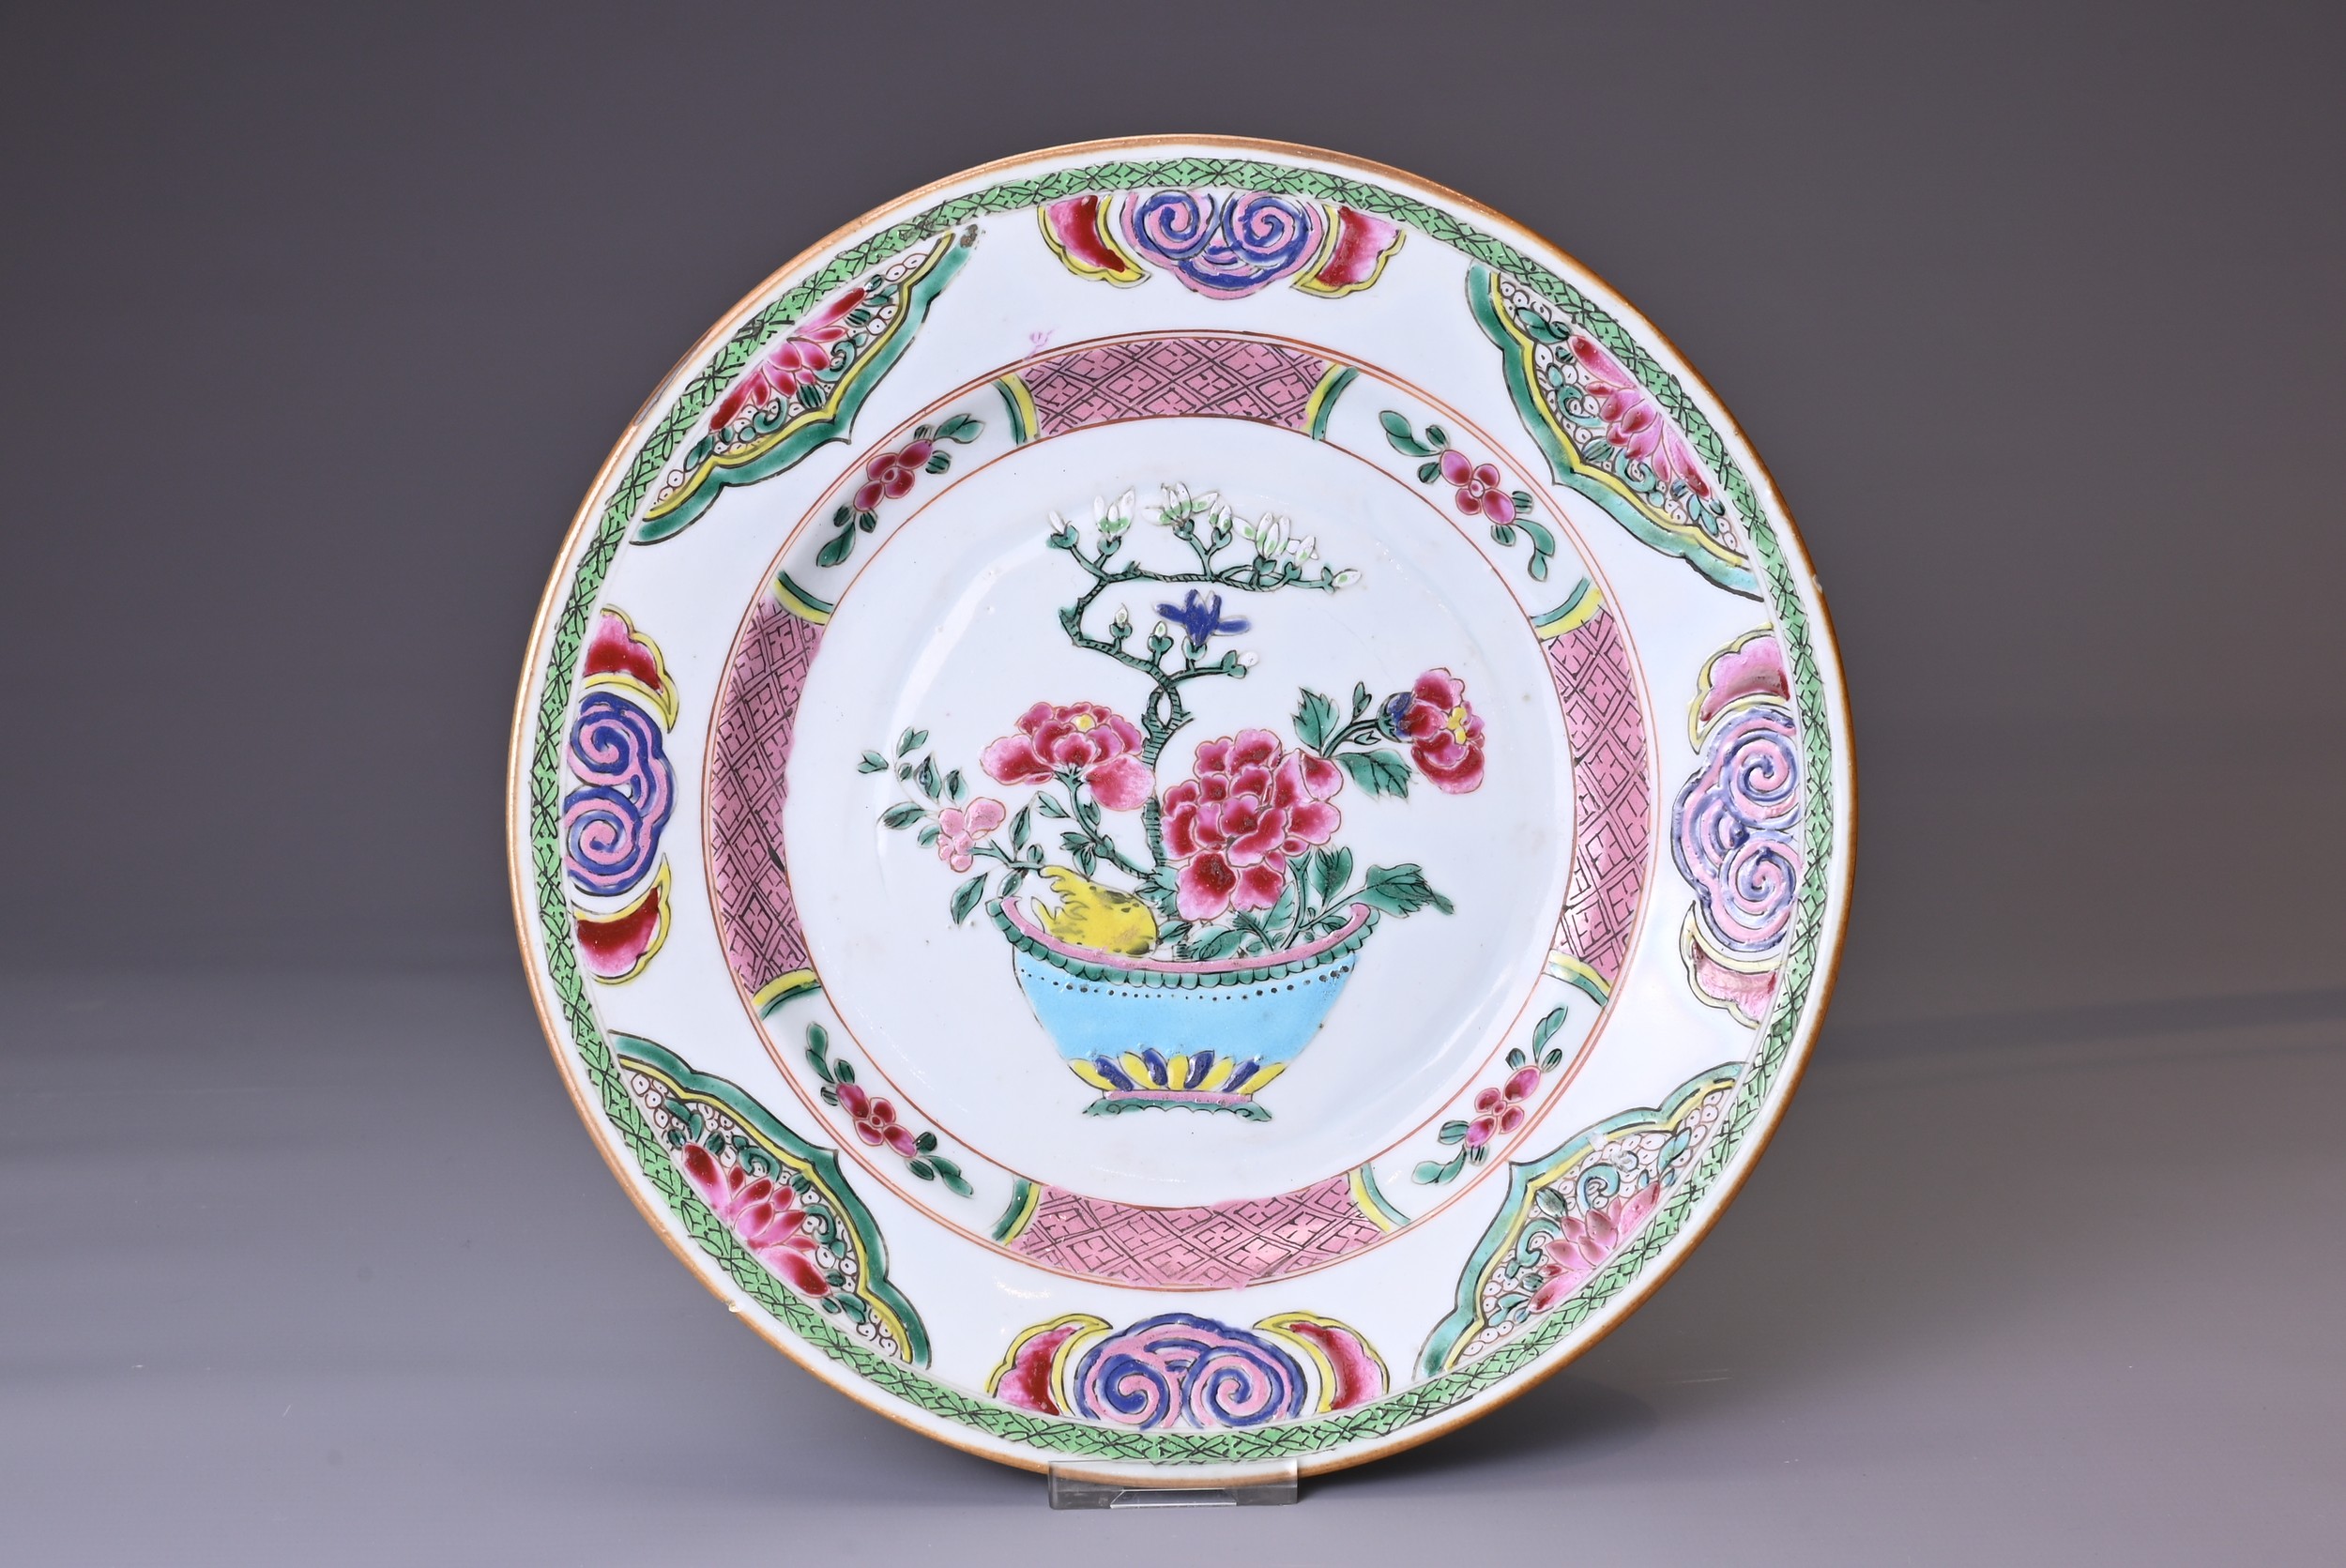 A CHINESE FAMILLE ROSE PORCELAIN DISH, 18TH CENTURY. Decorated in vibrant enamels with floral basket